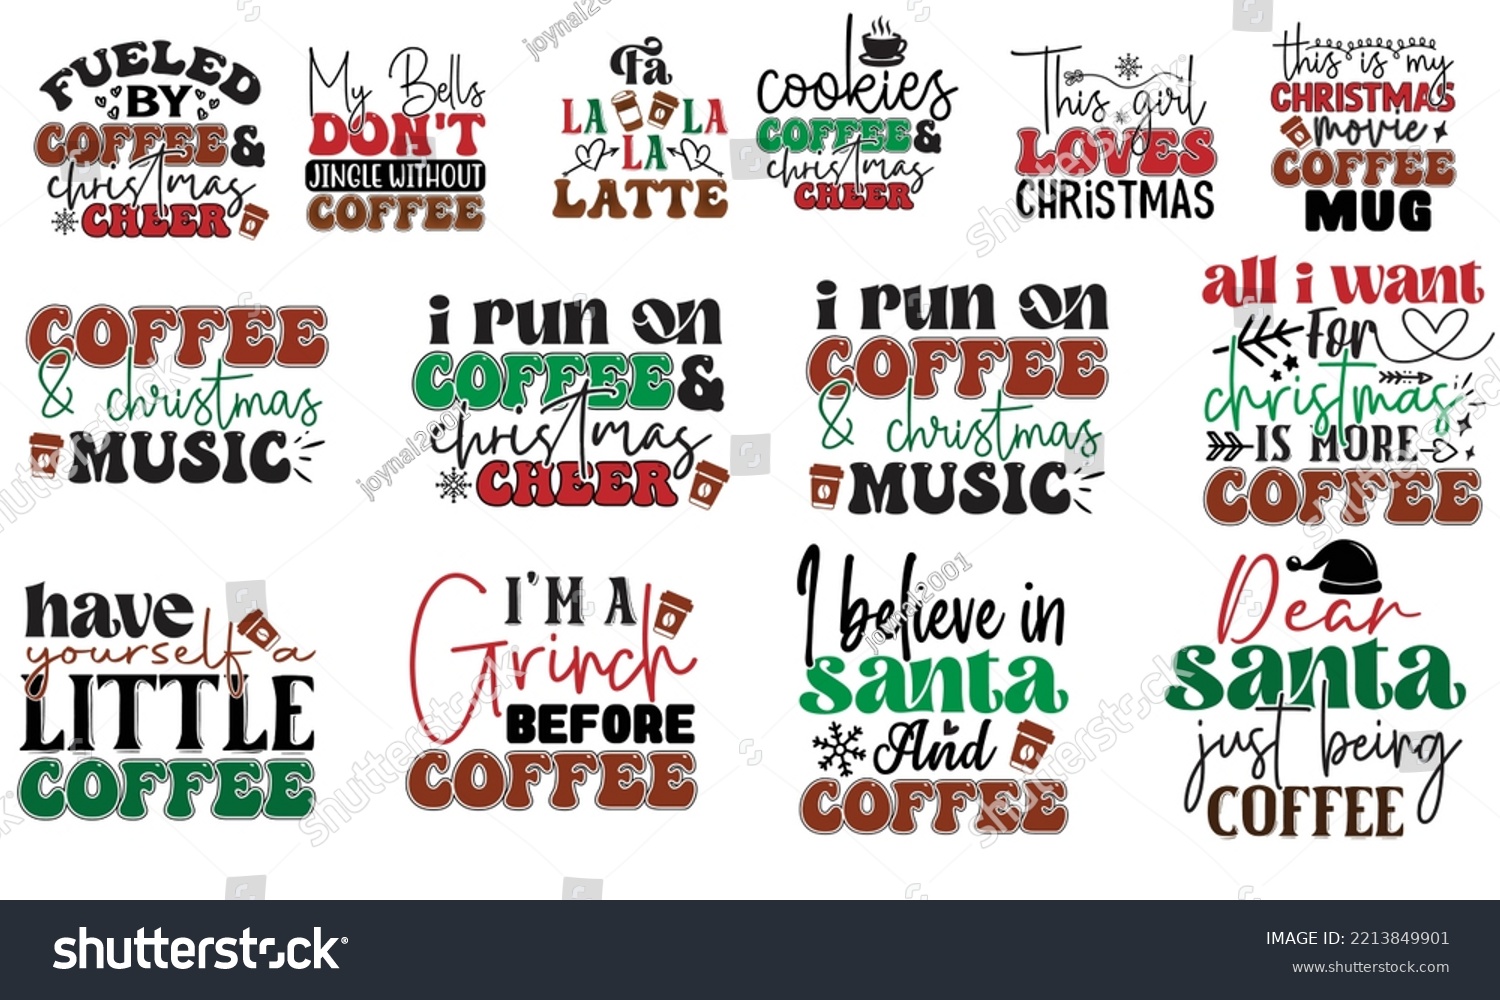 SVG of Christmas Coffee SVG Quotes SVG Cut Files Designs. Christmas Stickers quotes SVG cut files, Christmas Stickers quotes t shirt designs, Saying about Breast Coffee Stickers . svg